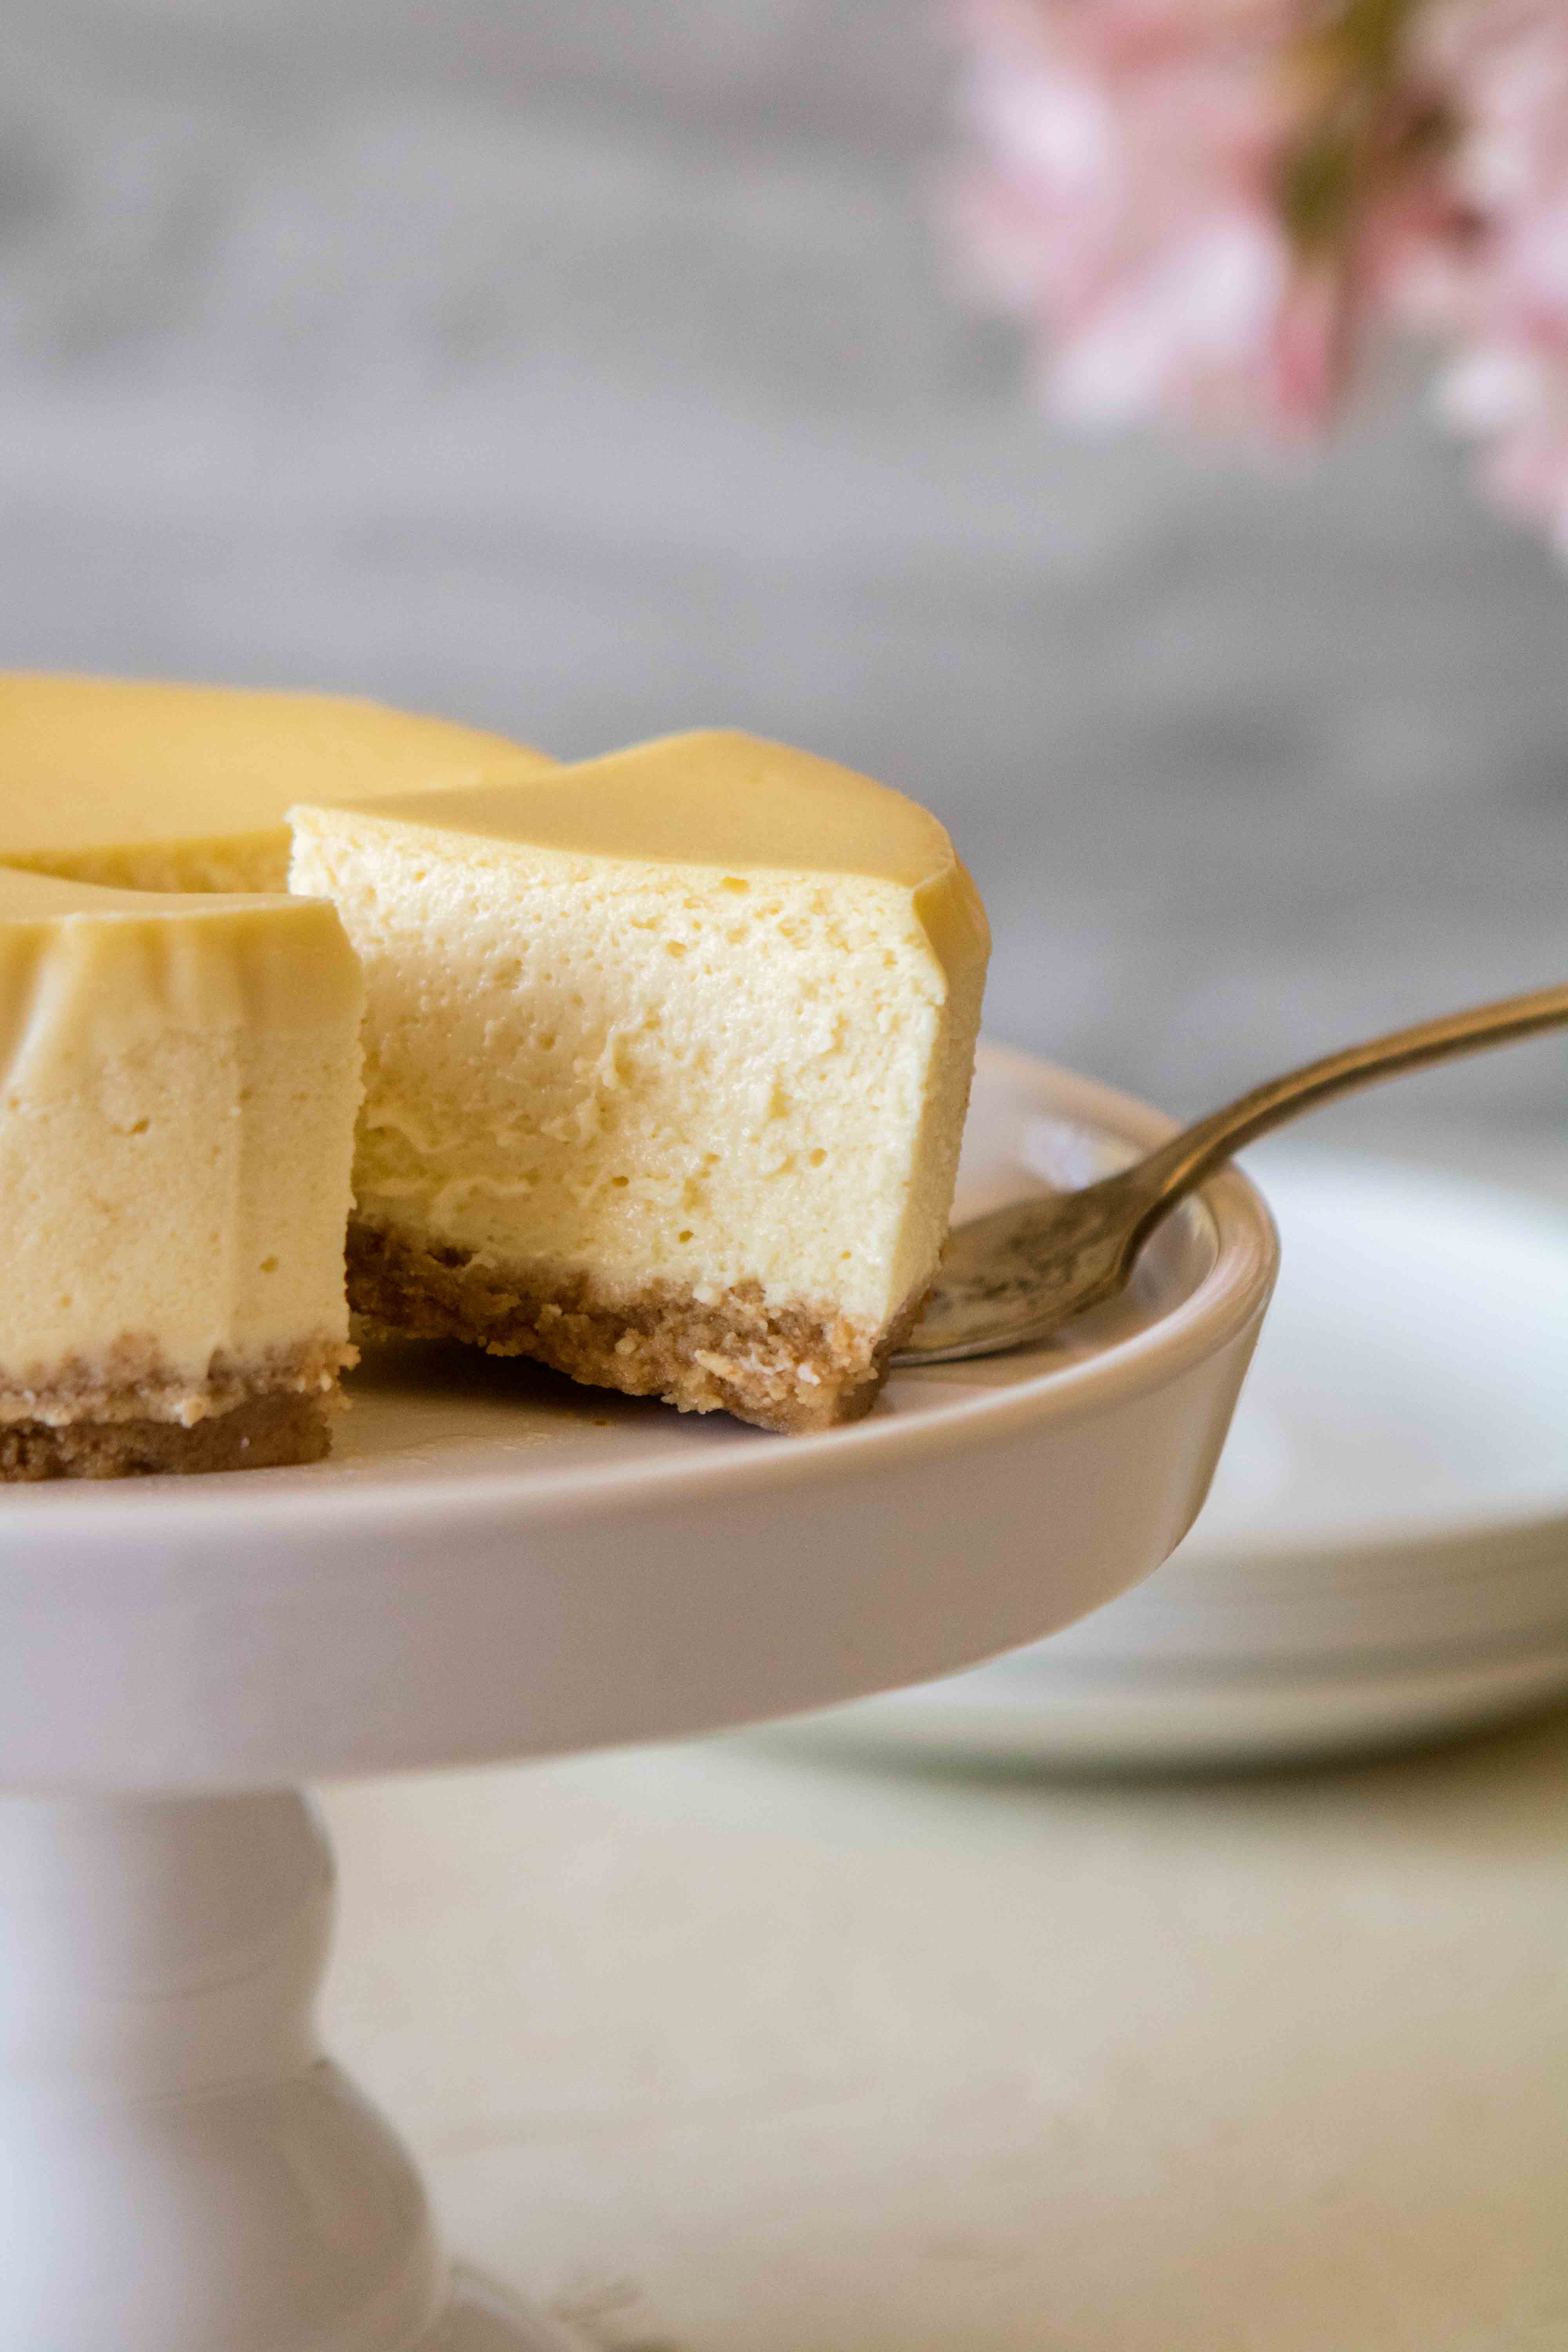 https://lifestyleofafoodie.com/wp-content/uploads/2020/05/New-York-Mini-Cheesecake-for-one-17-of-28-1.jpg